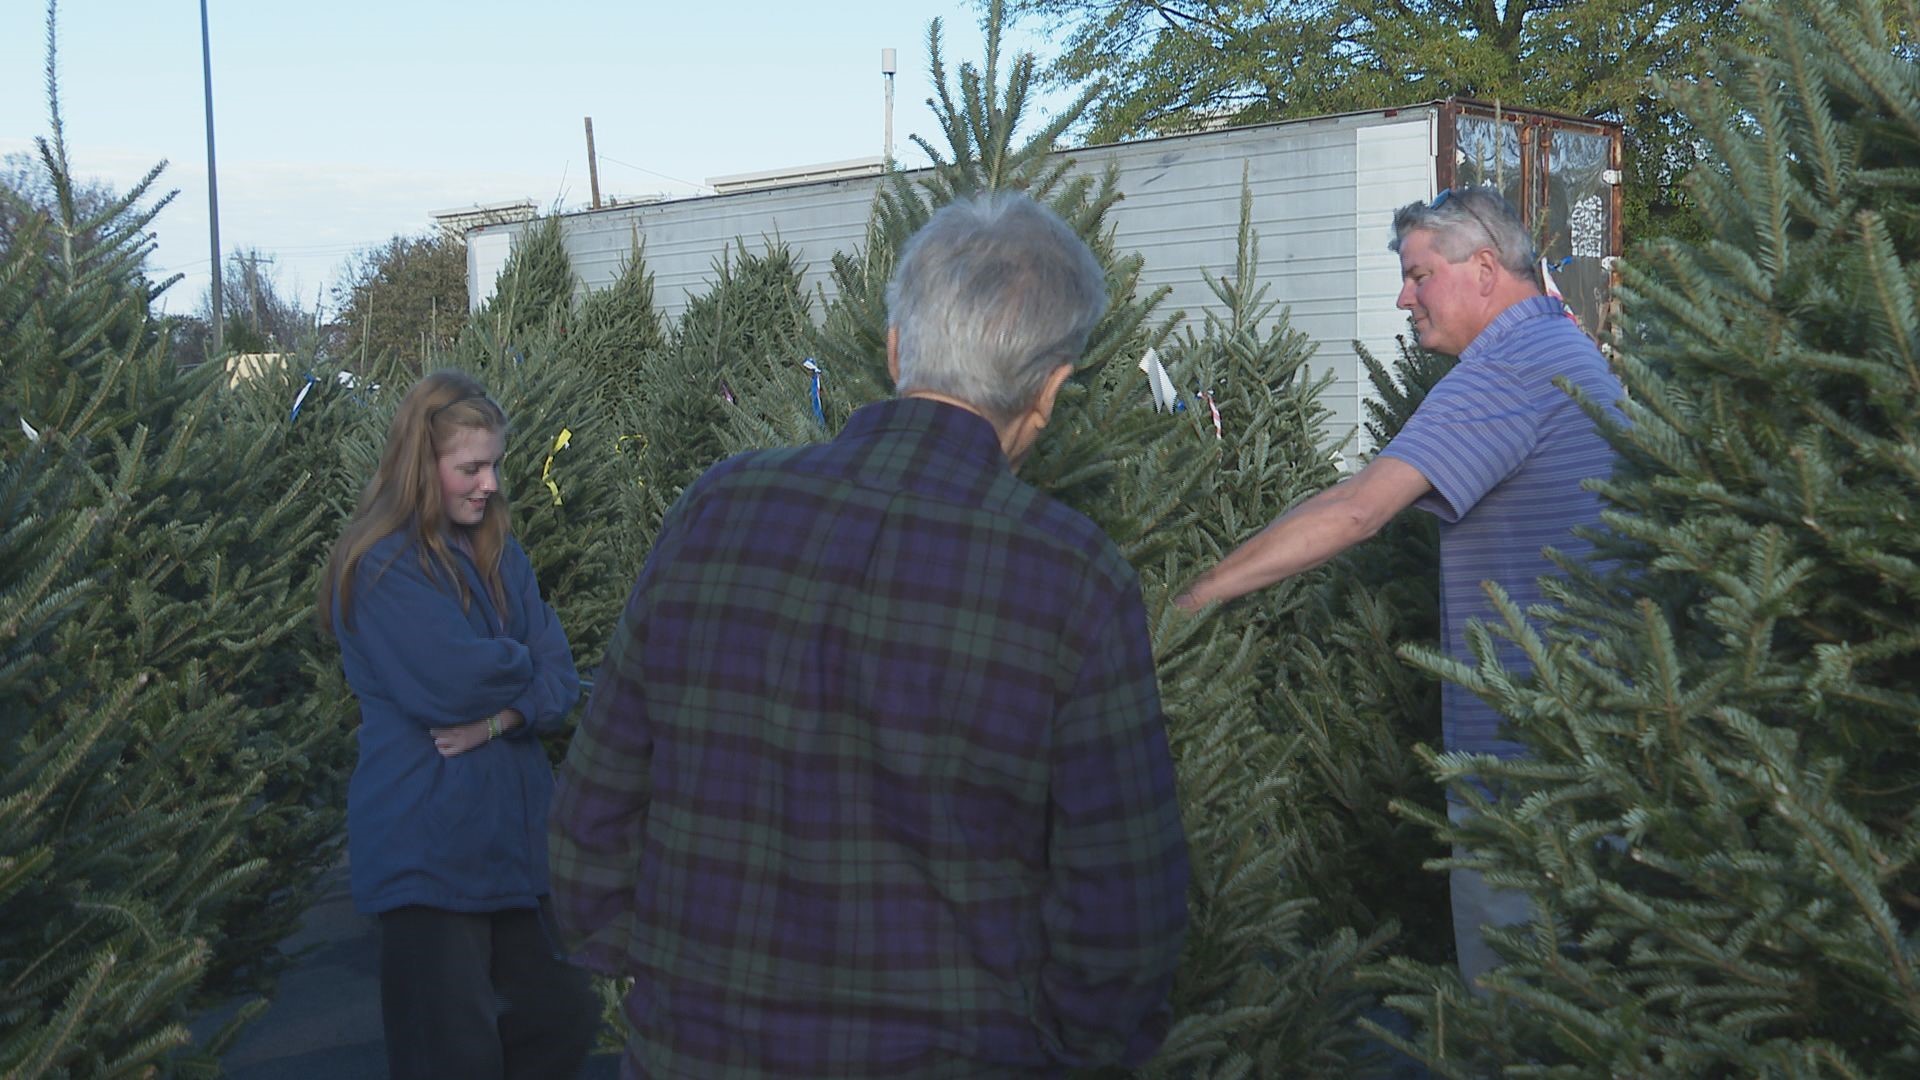 Fred & Dot's Christmas Trees has been in business in the Triad for 35 years.